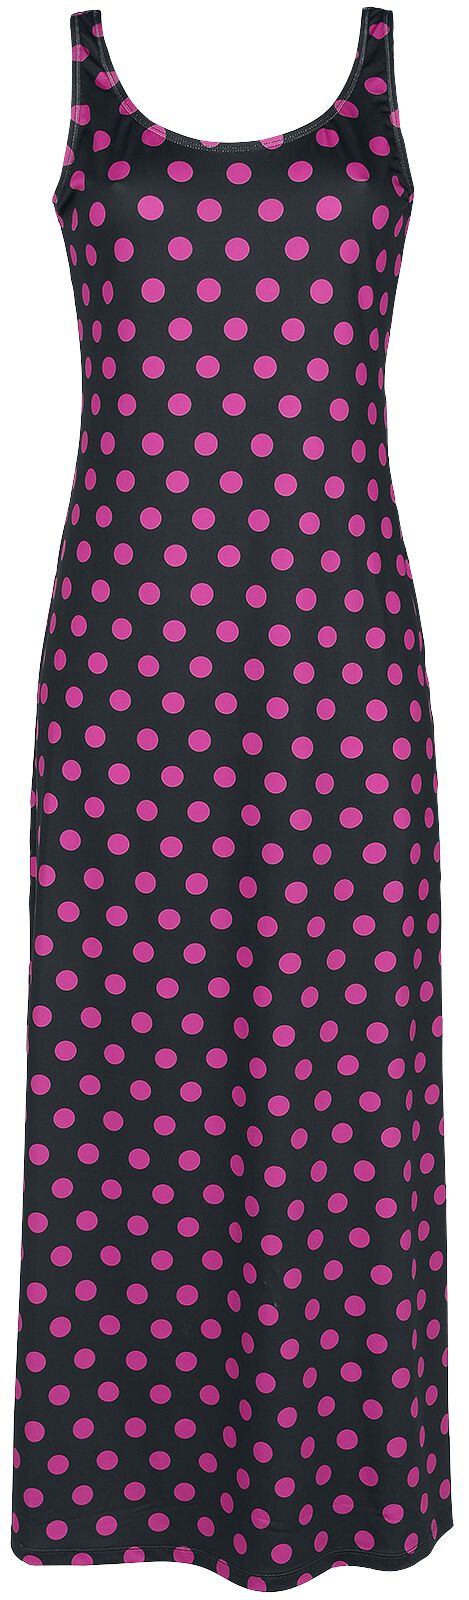 Image of Pussy Deluxe - Classic Pink Dotties Beach Dress - Abito lungo - Donna - nero rosa